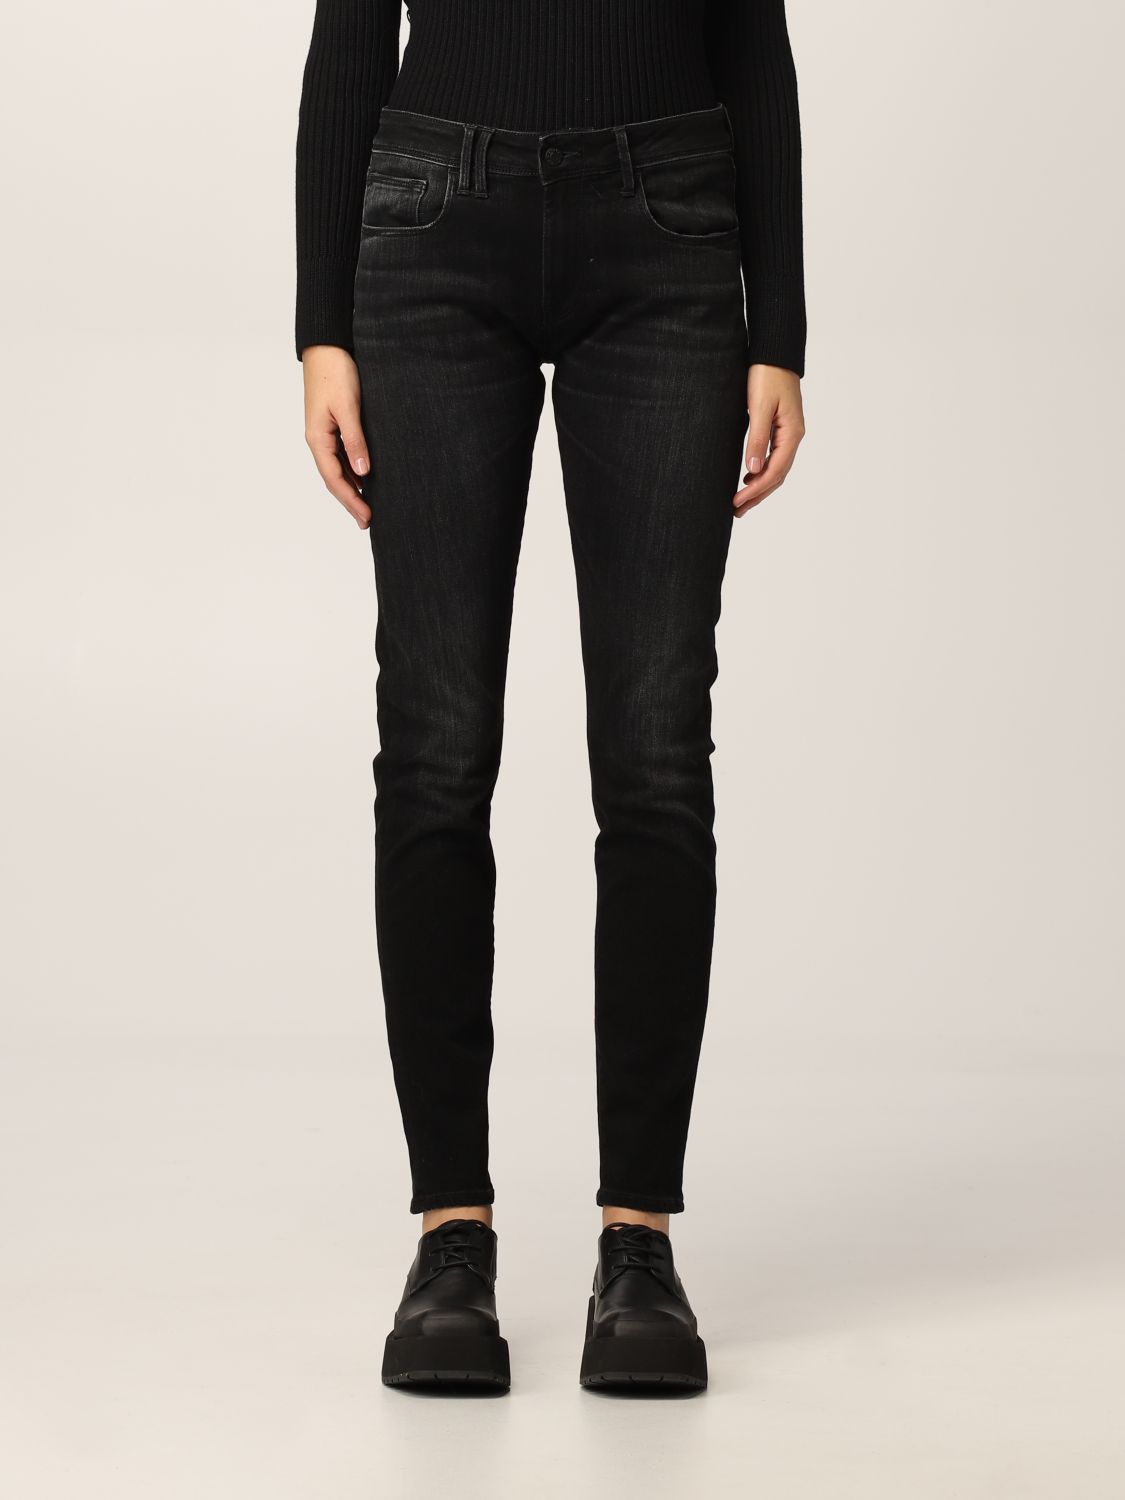 Jeans Cycle: Jeans men Cycle black 1